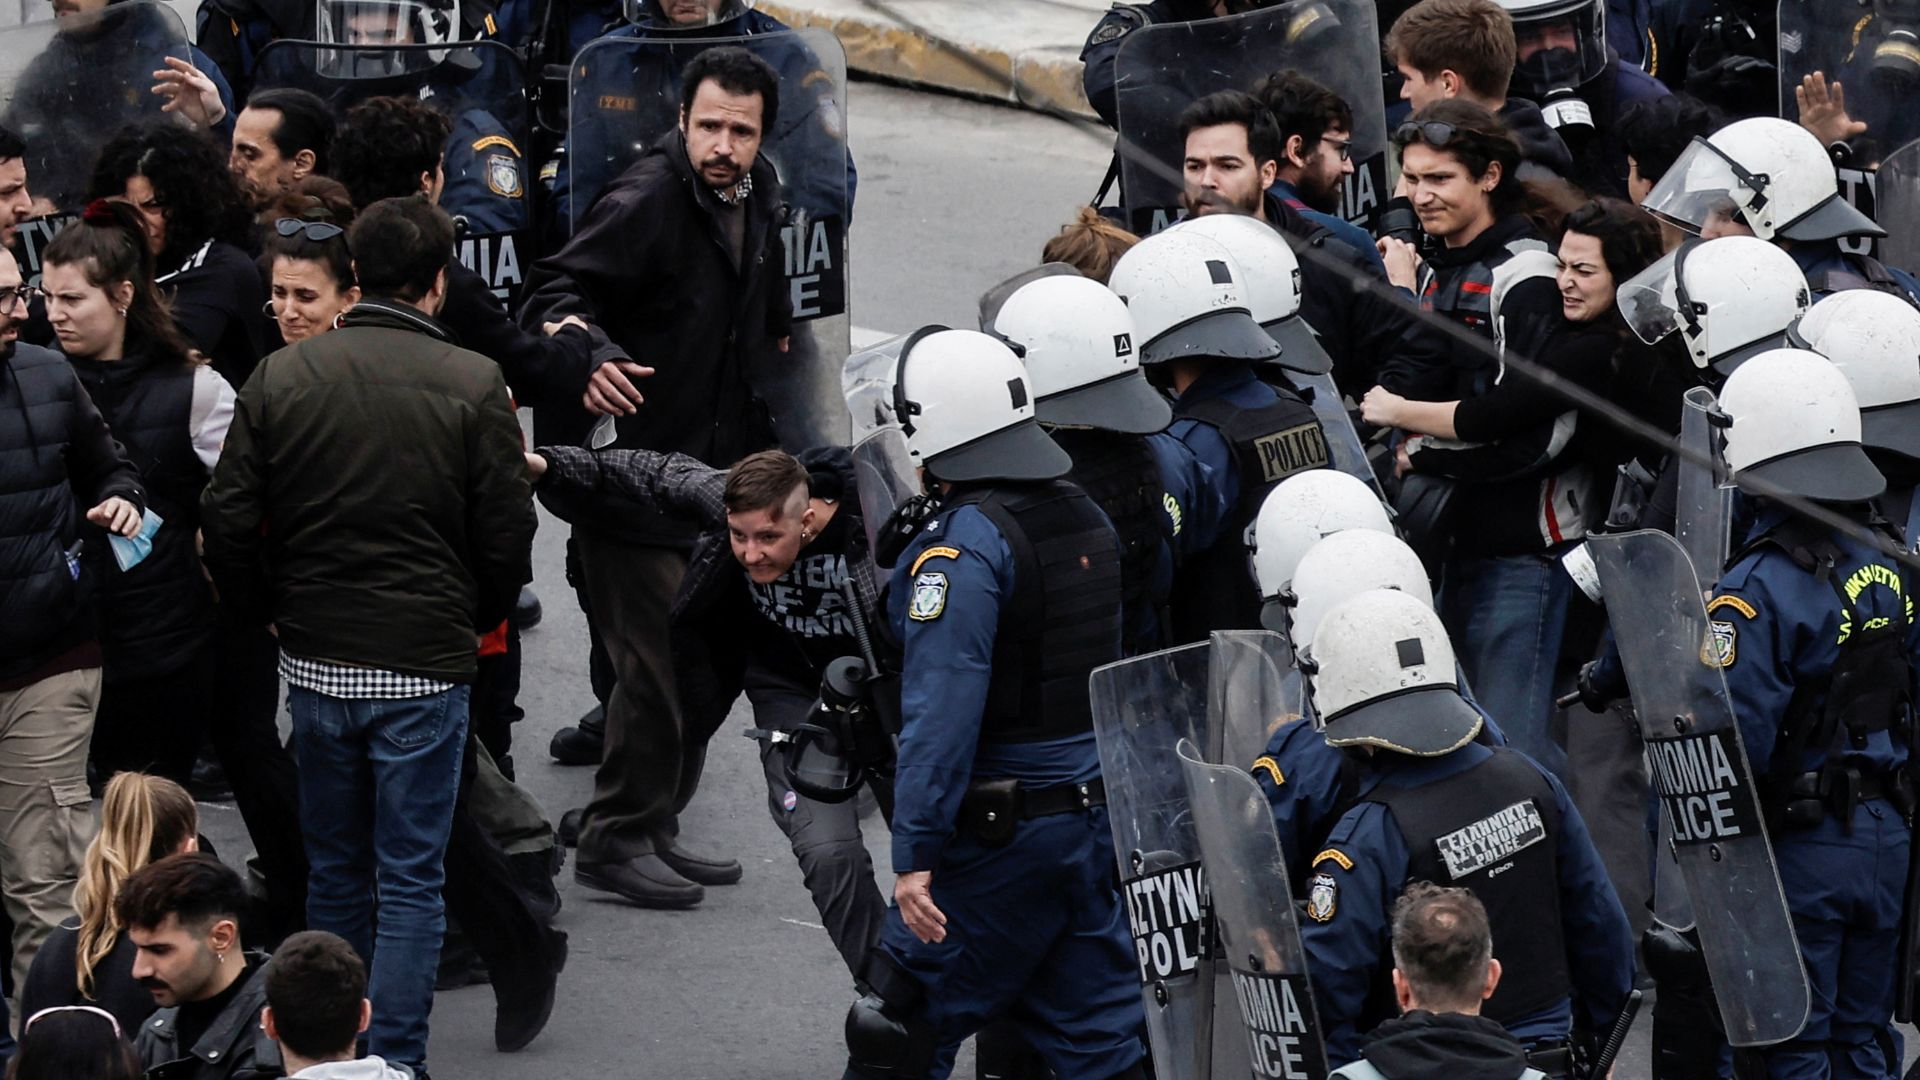 Athens police among protesters during a 24-hour strike to mark the first anniversary of a deadly train crash that killed 57 people. /Louisa Gouliamaki/Reuters